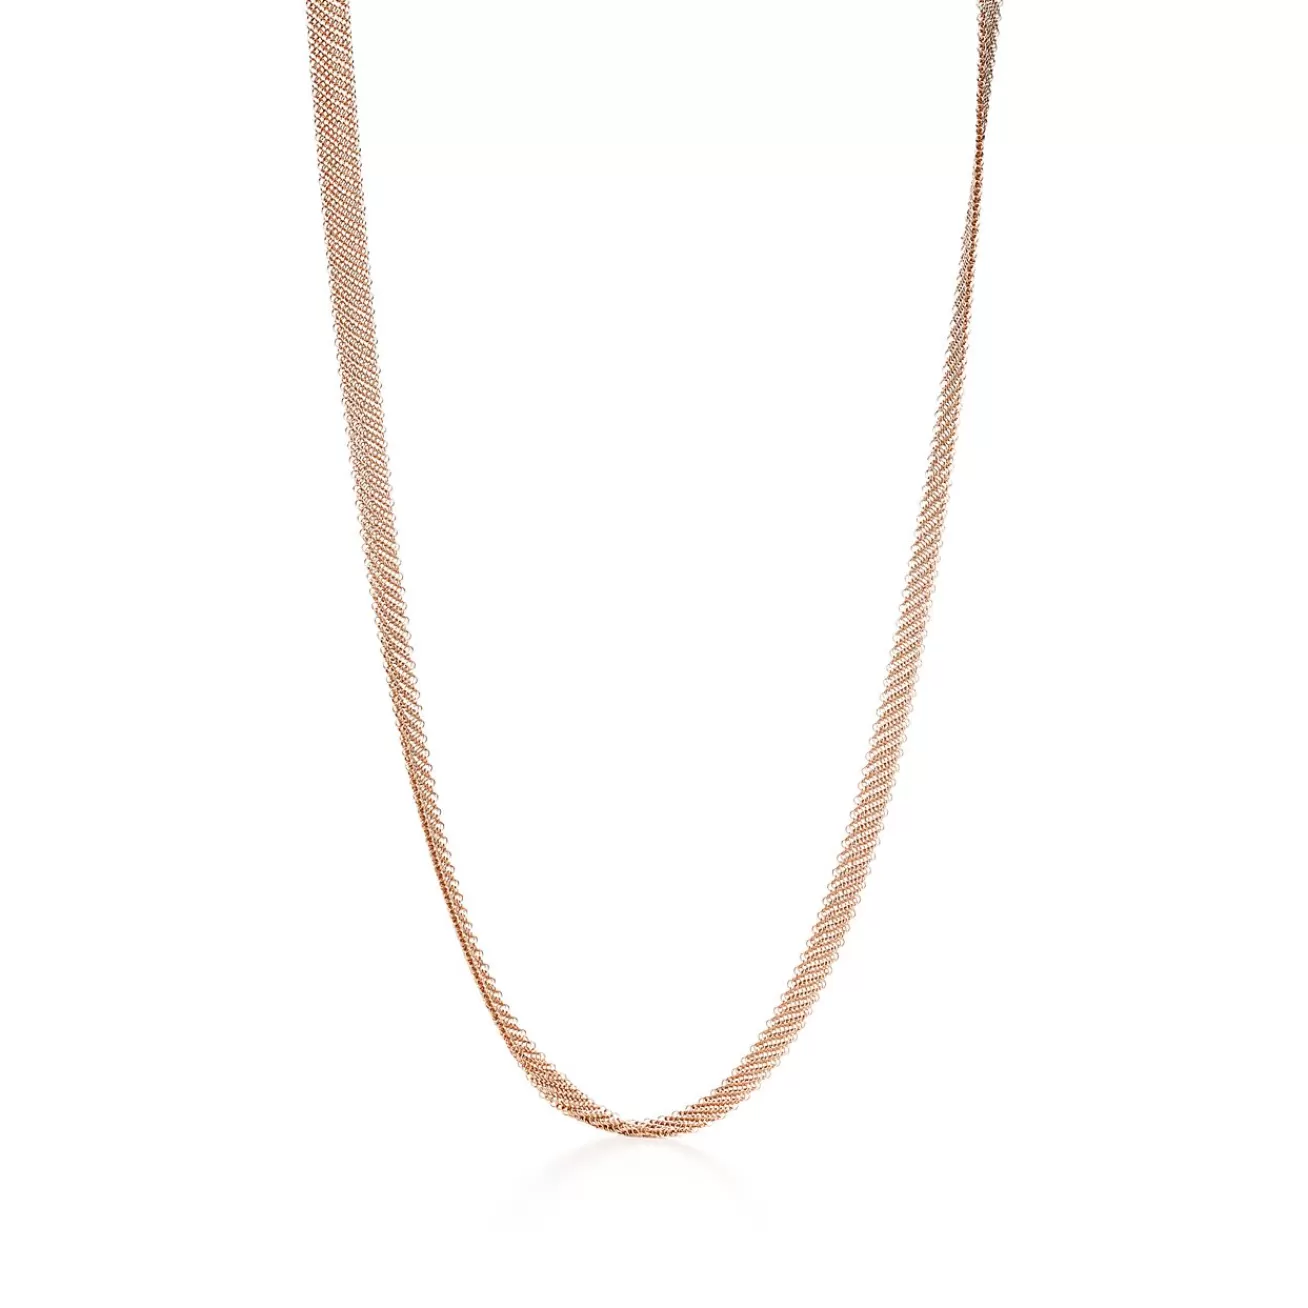 Tiffany & Co. Elsa Peretti® Mesh necklace in 18k rose gold. | ^ Necklaces & Pendants | Rose Gold Jewelry